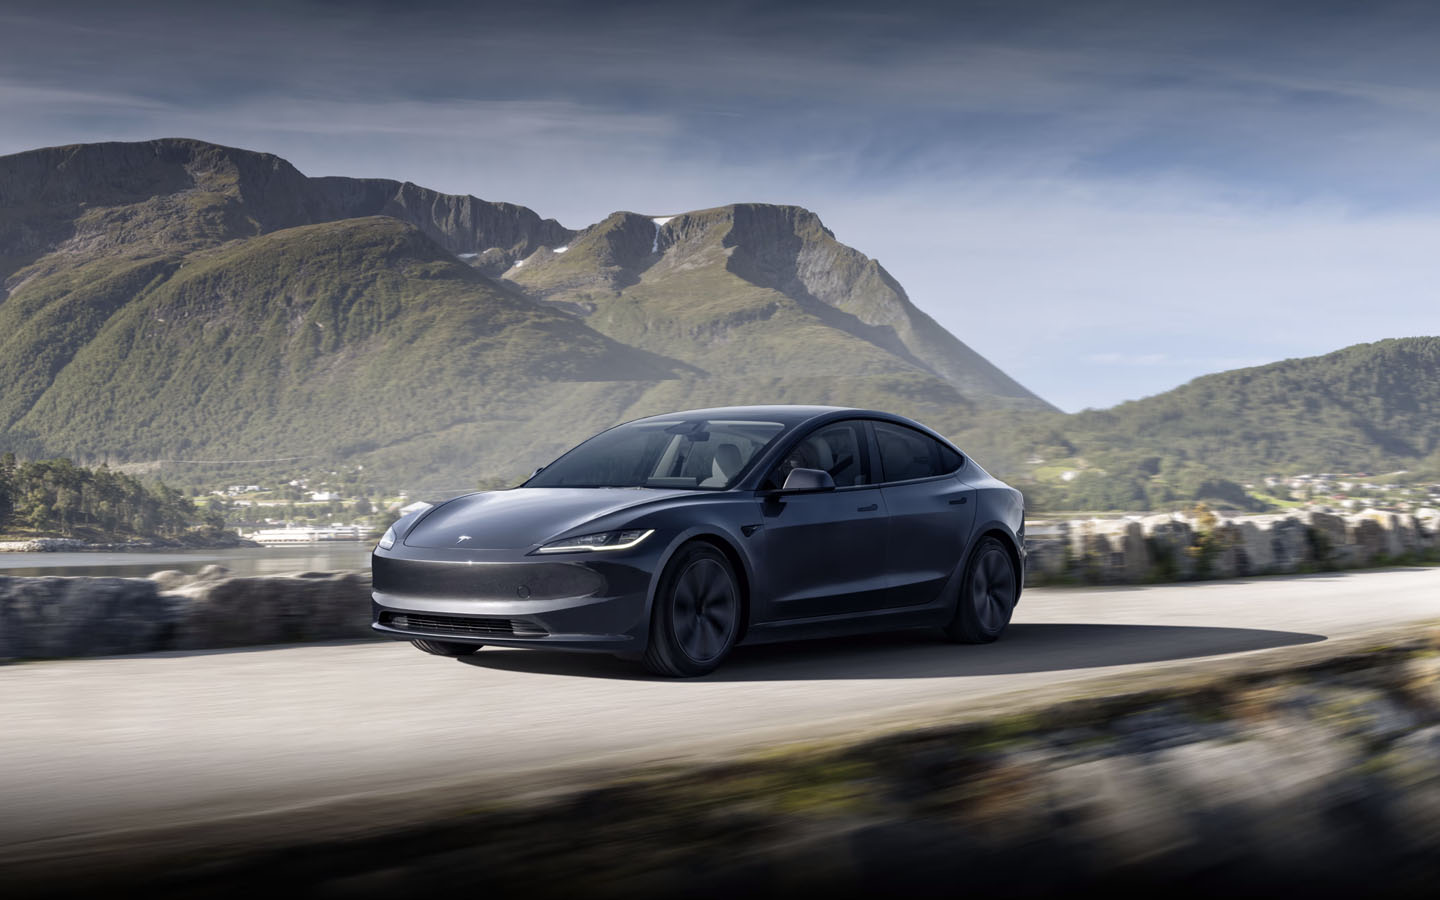 Tesla model 3 makes it to the list of the fastest electric cars